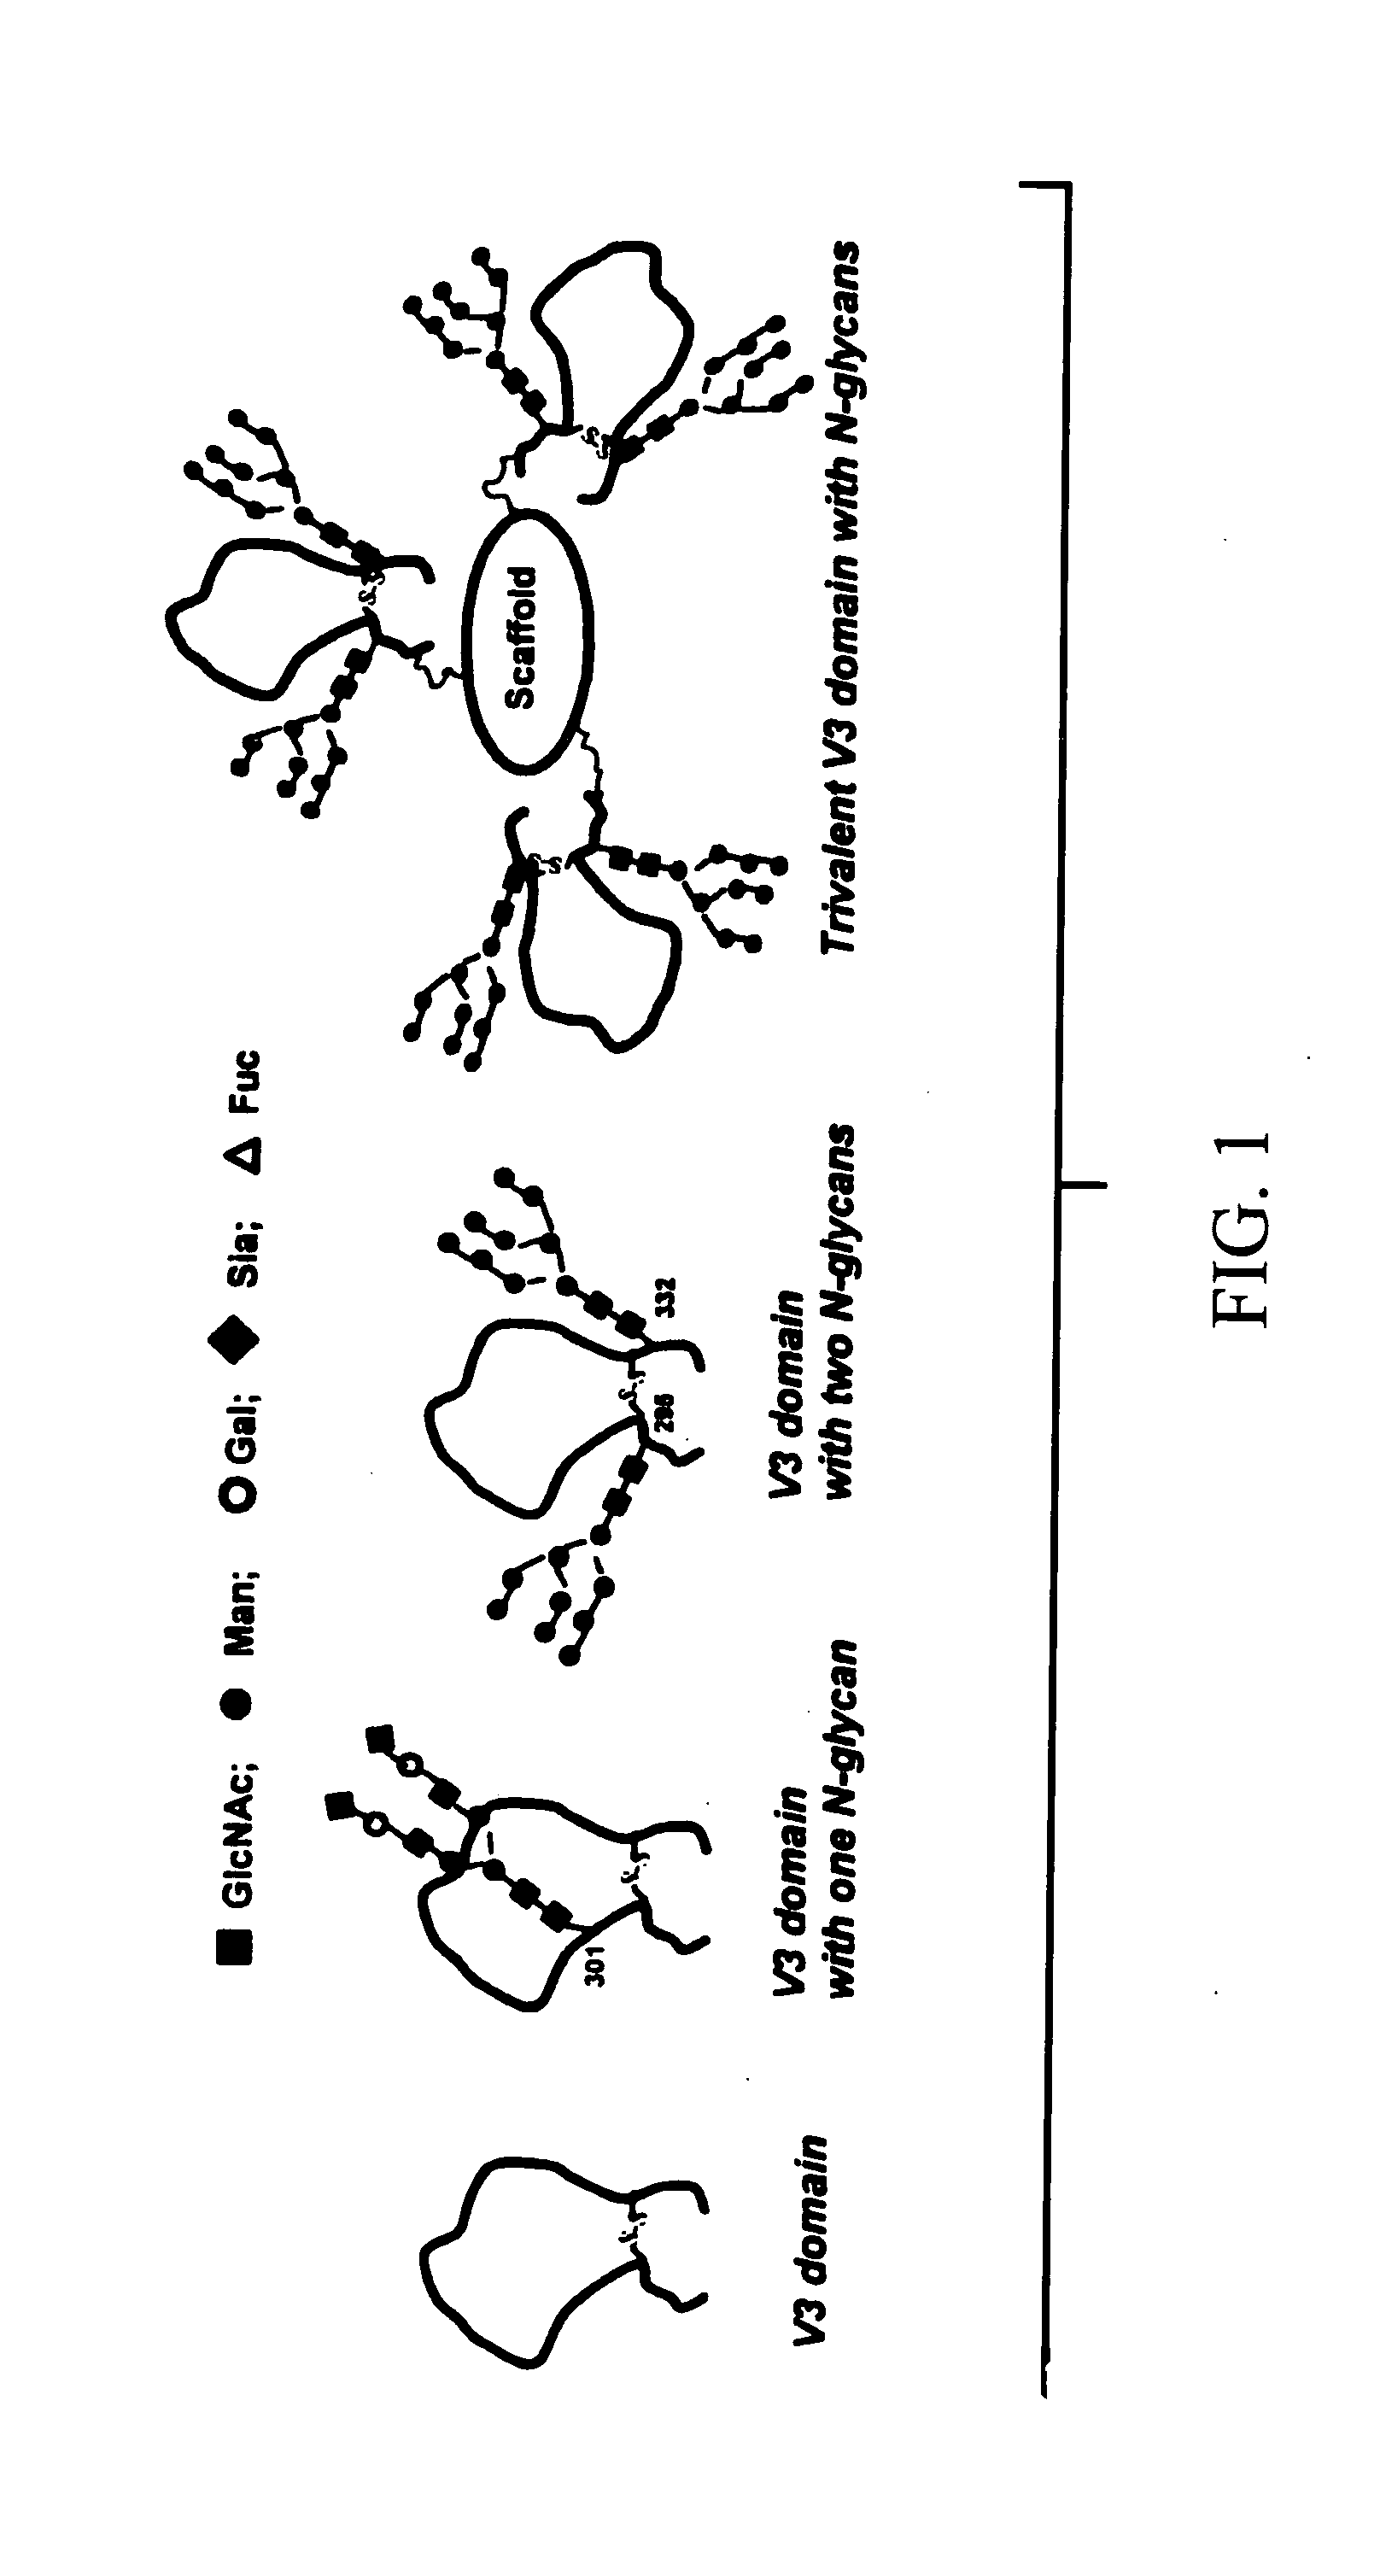 HIV-1 glycopeptides and derivatives; preparation and applications thereof